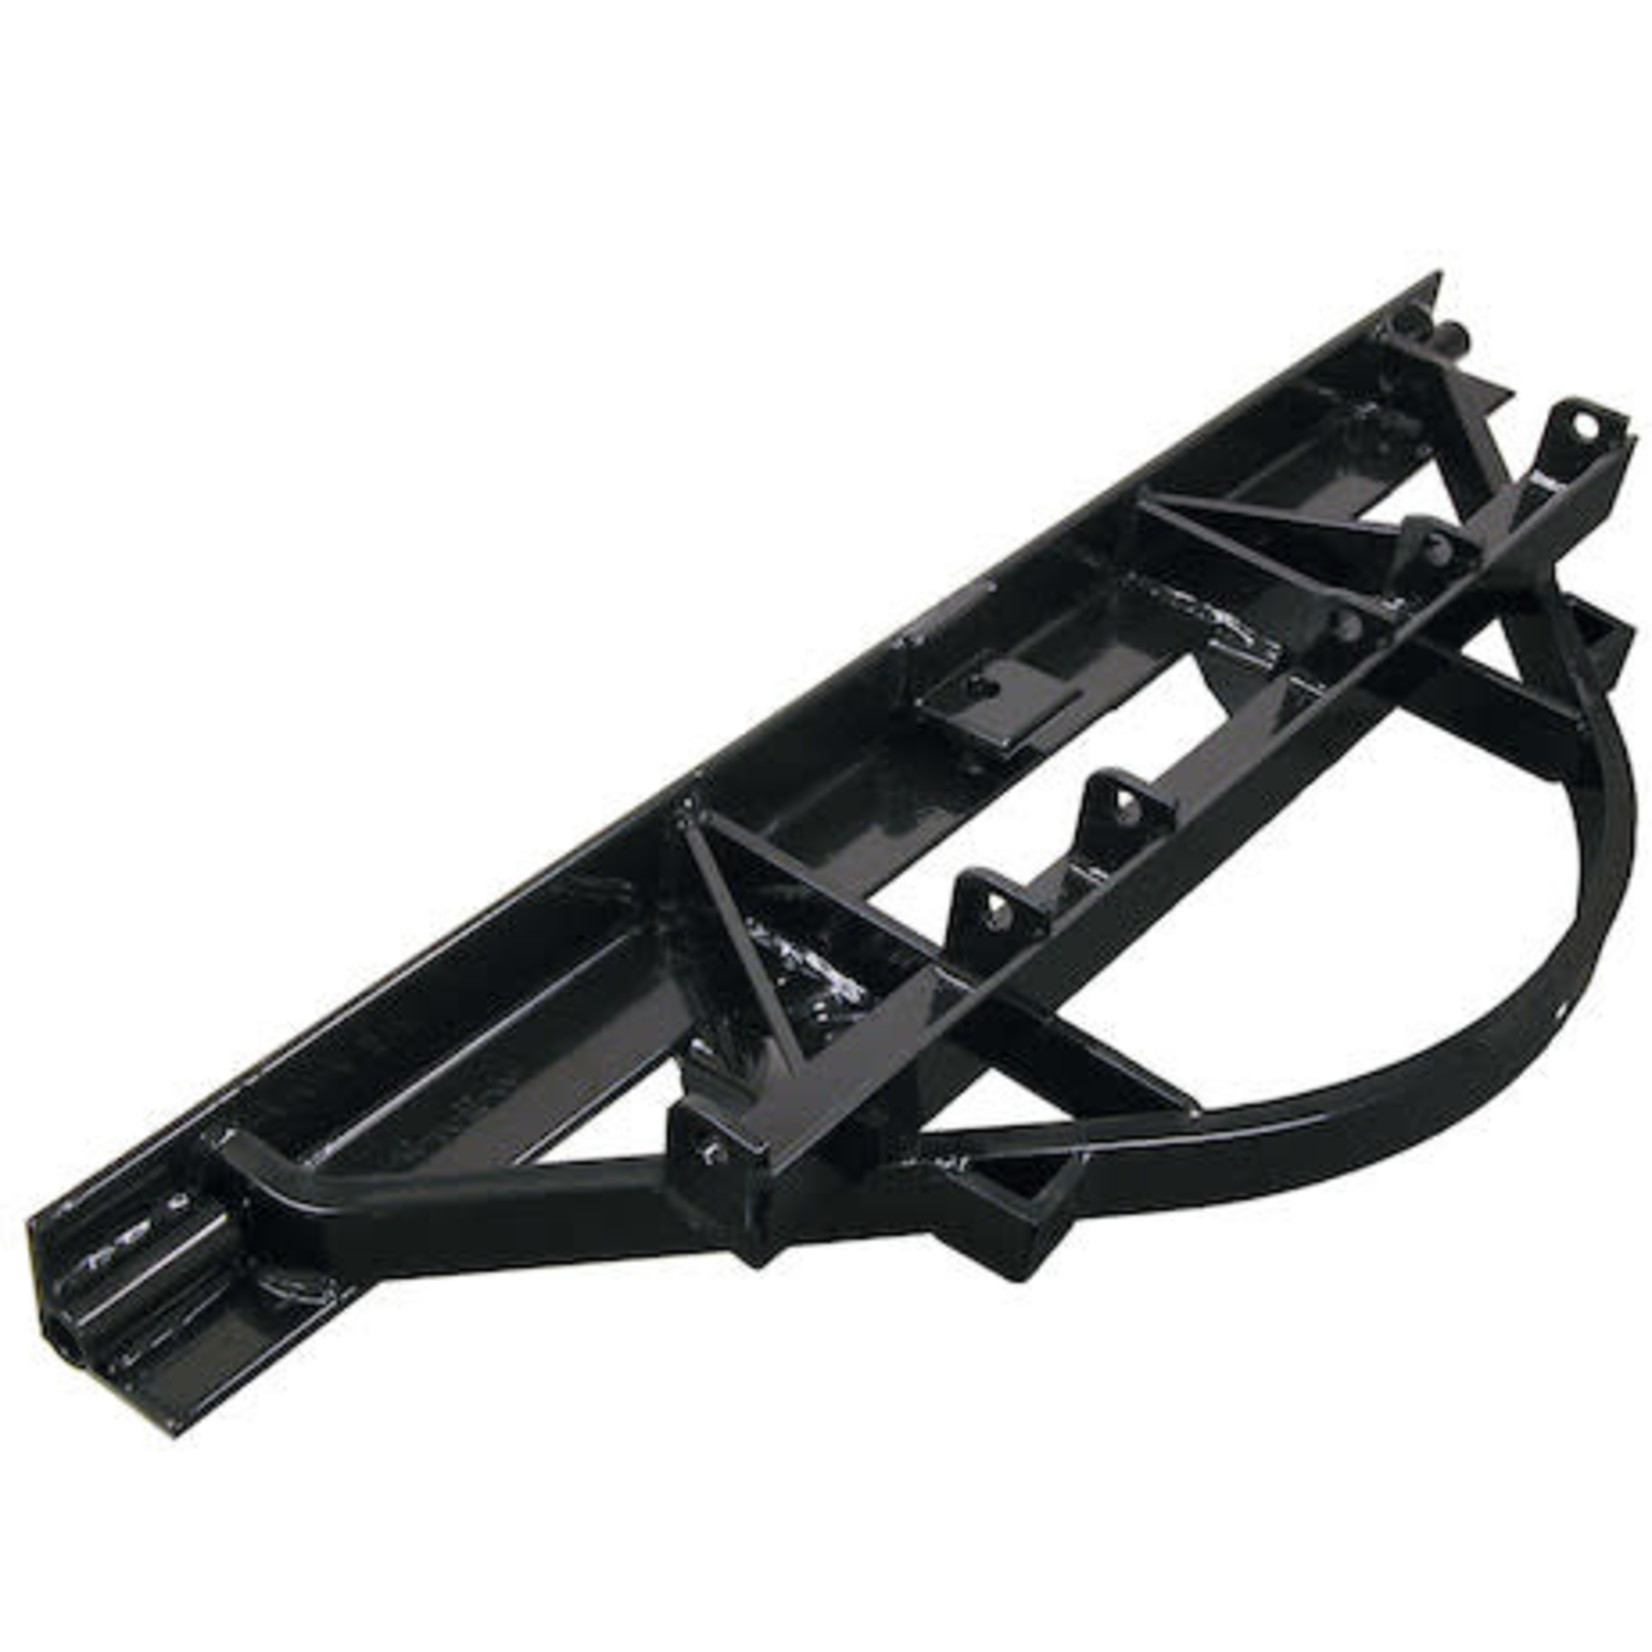 SAM SAM Old-Style Sector For 8 Foot Plow-Replaces Meyer #12793